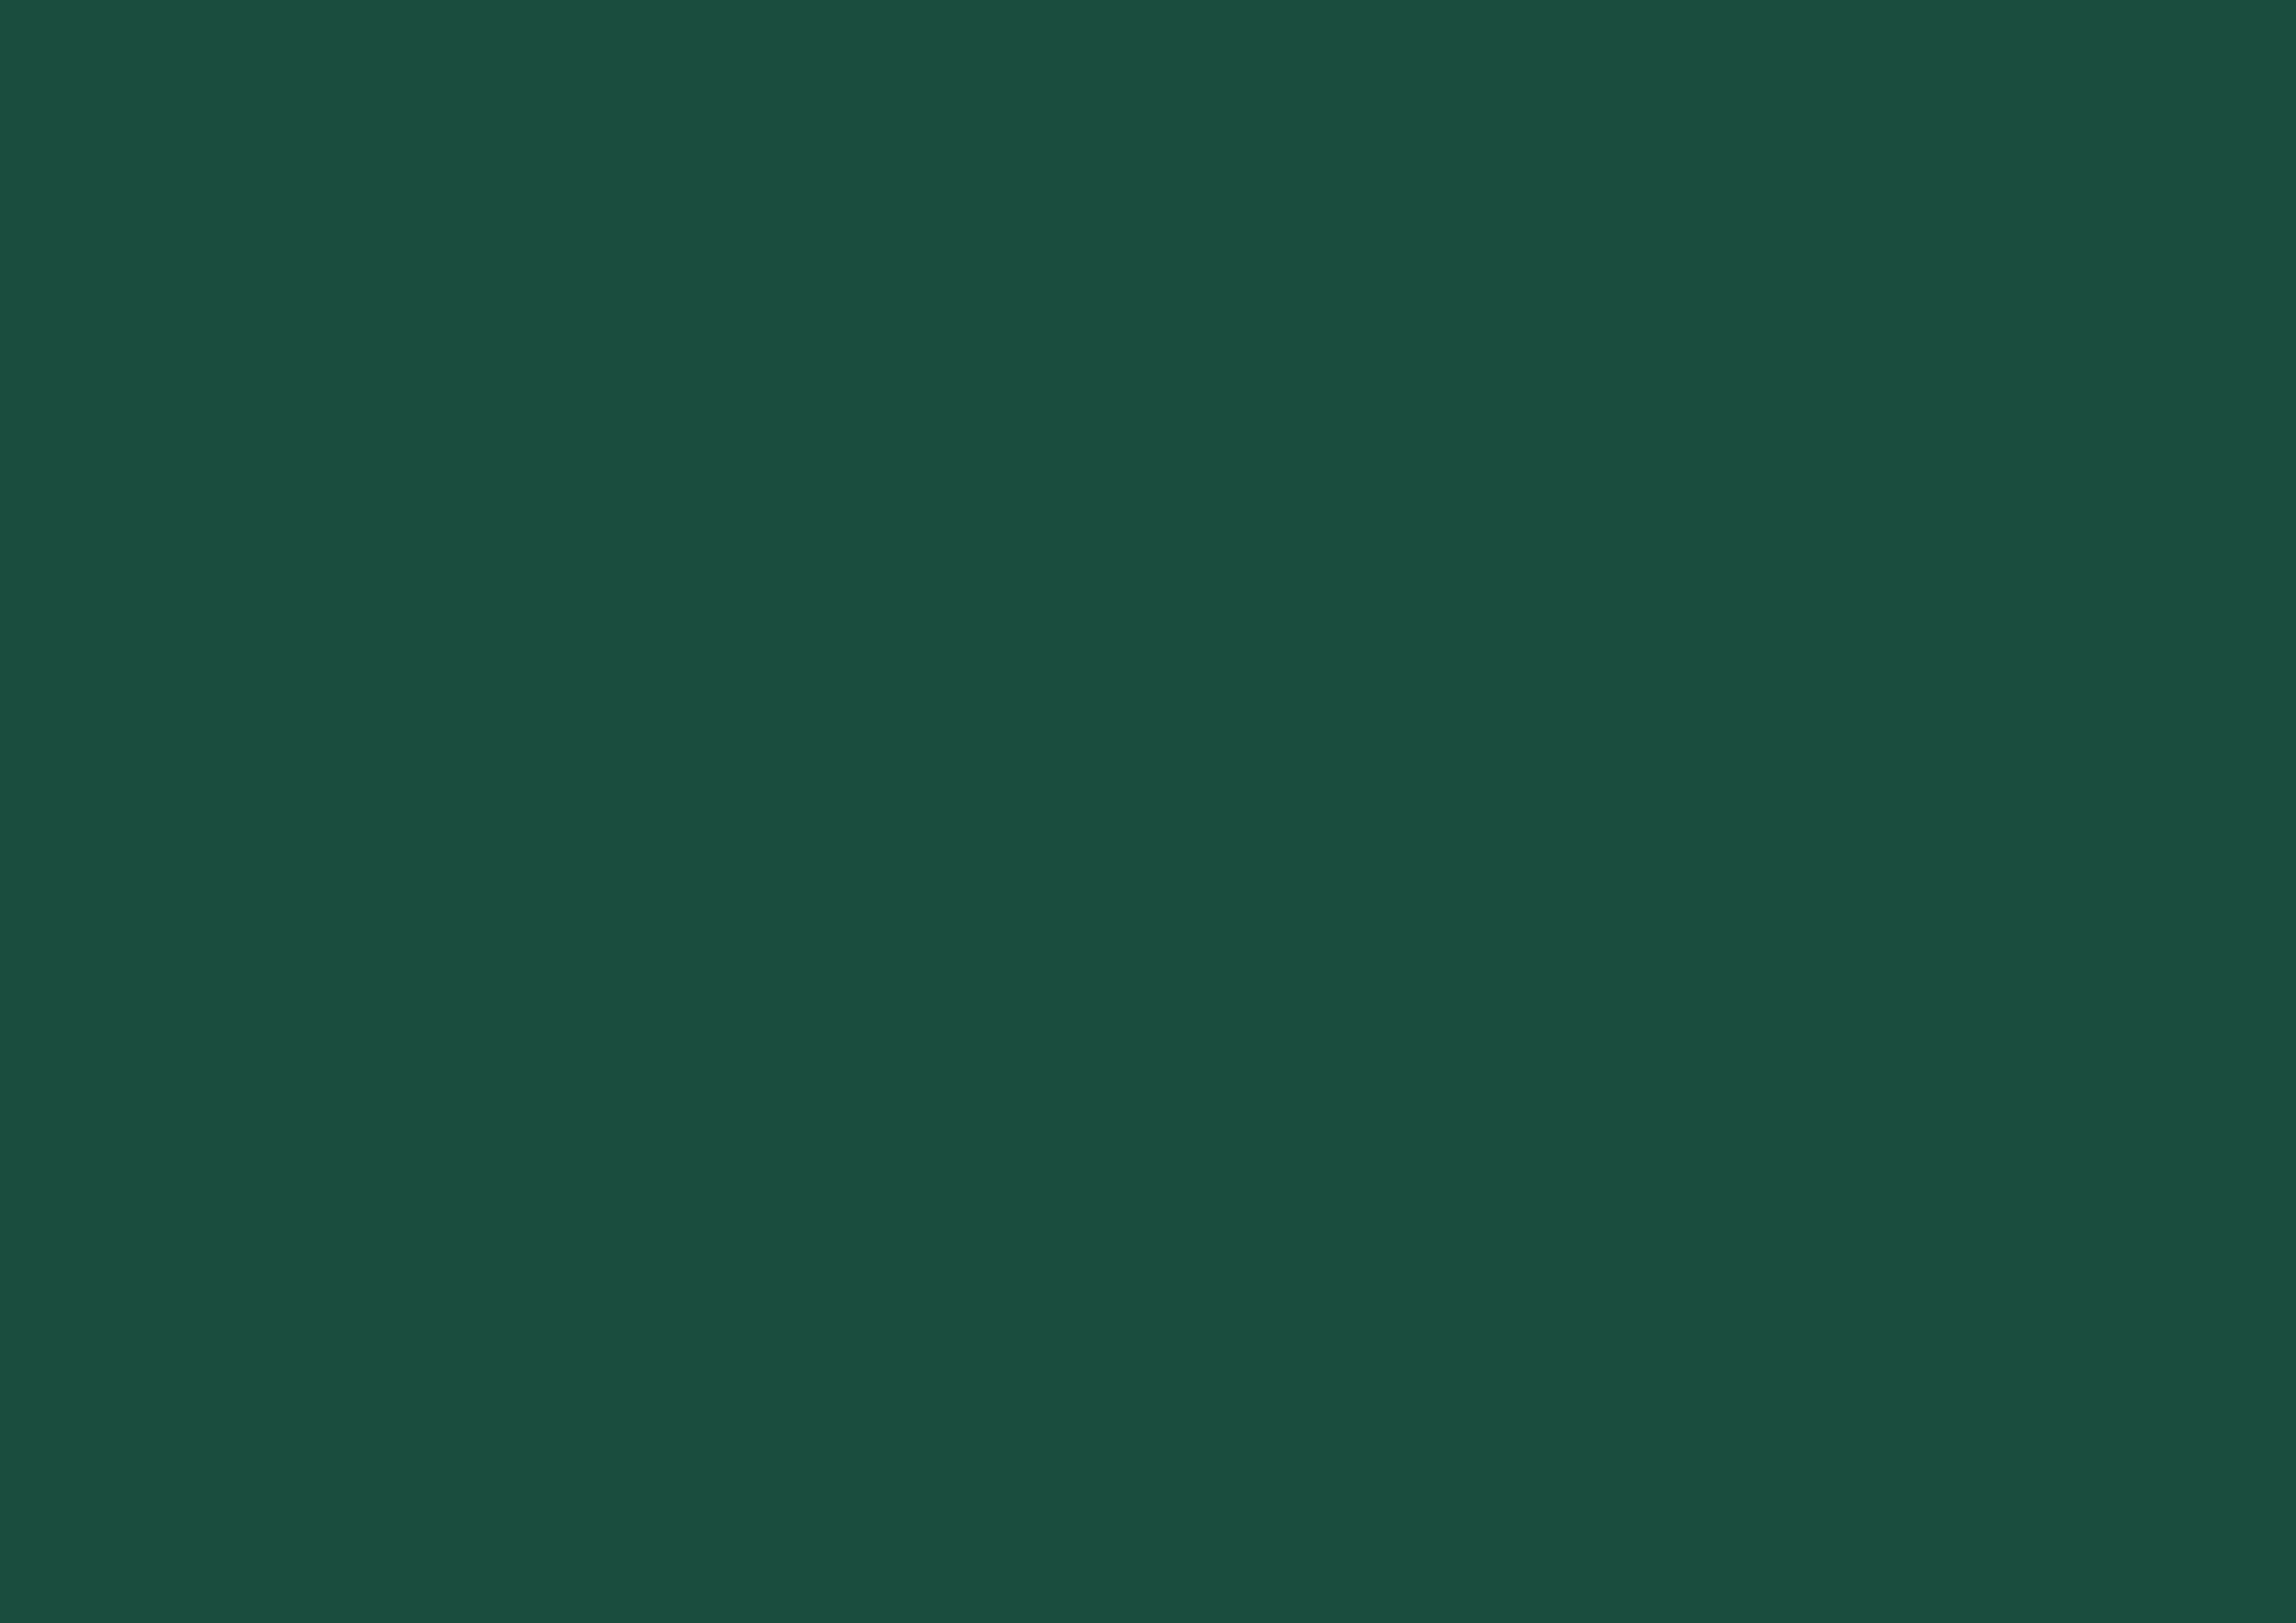 3508x2480 Brunswick Green Solid Color Background